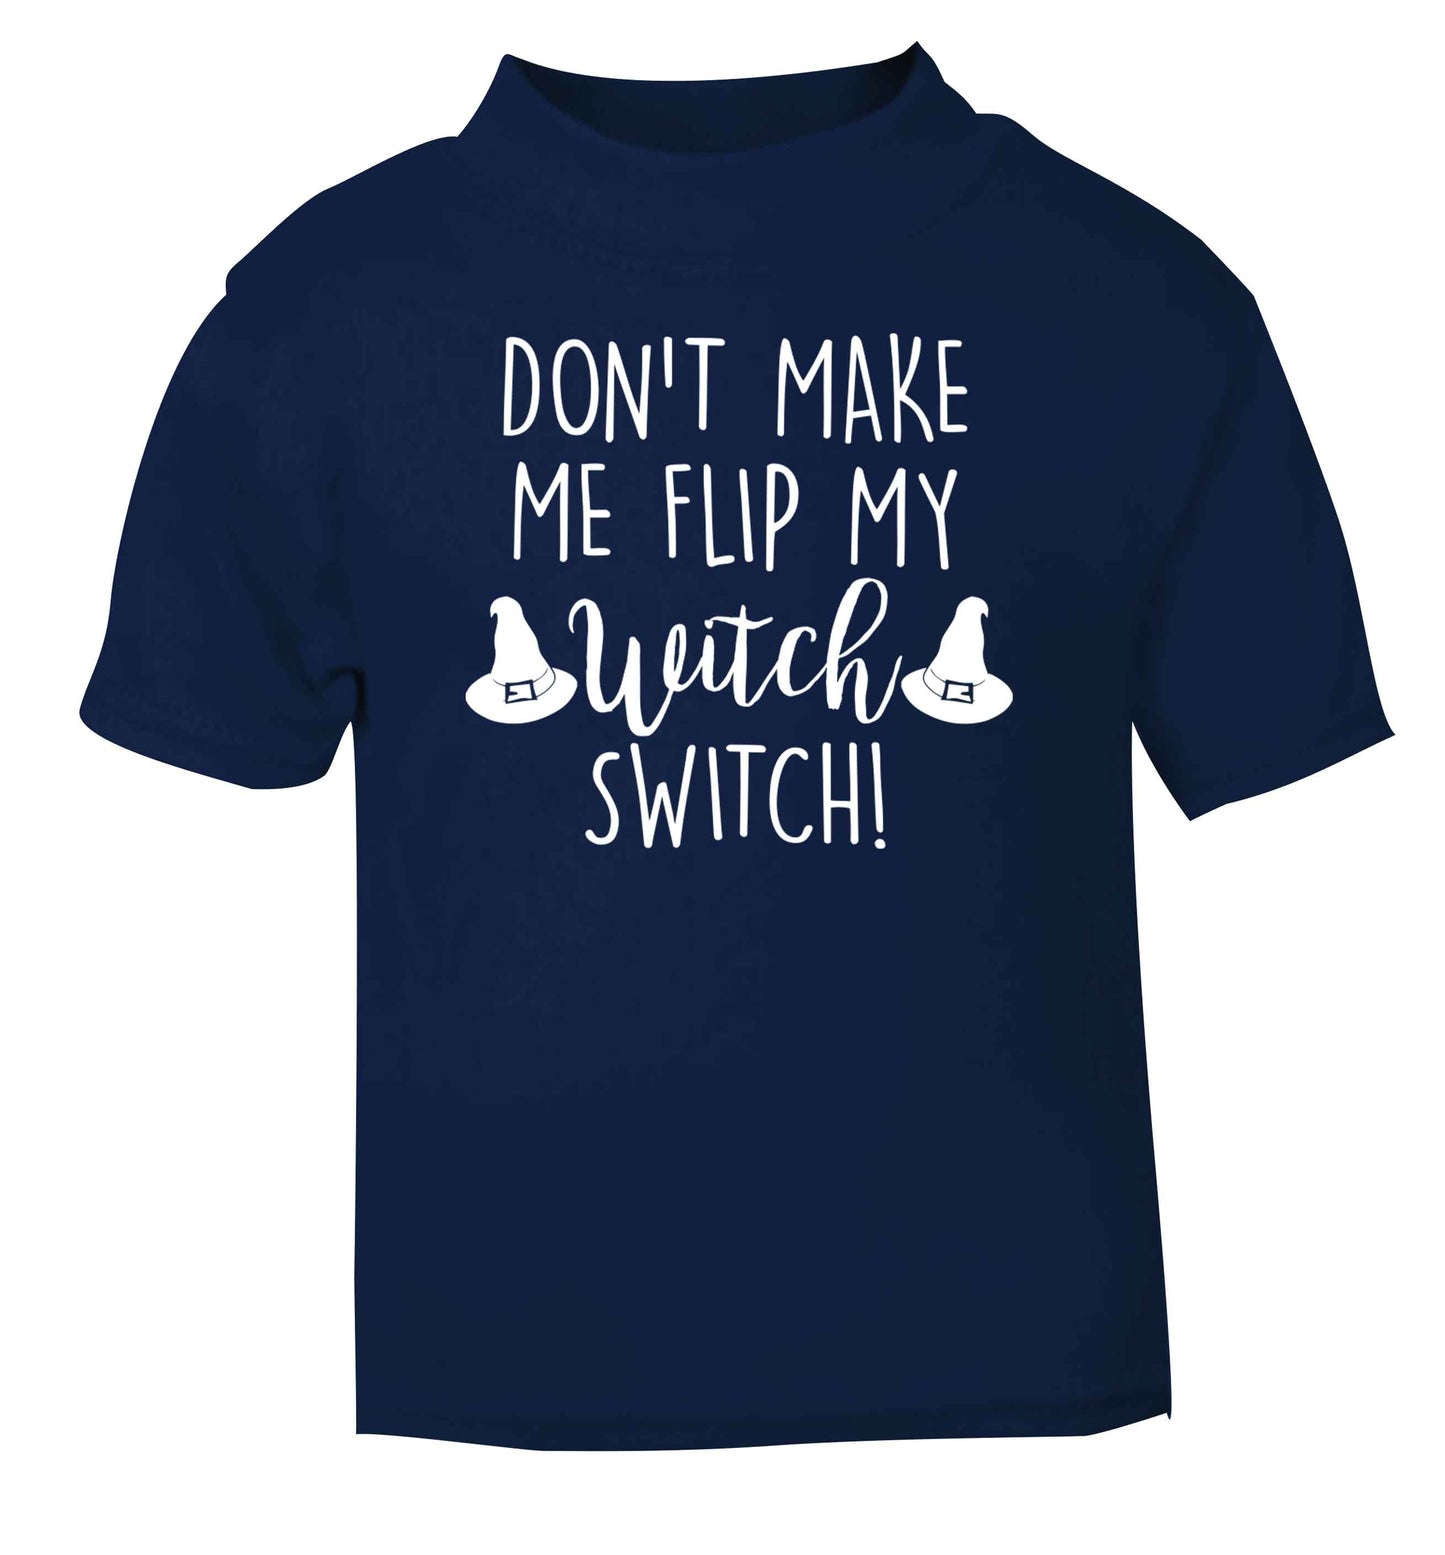 Don't make me flip my witch switch navy baby toddler Tshirt 2 Years